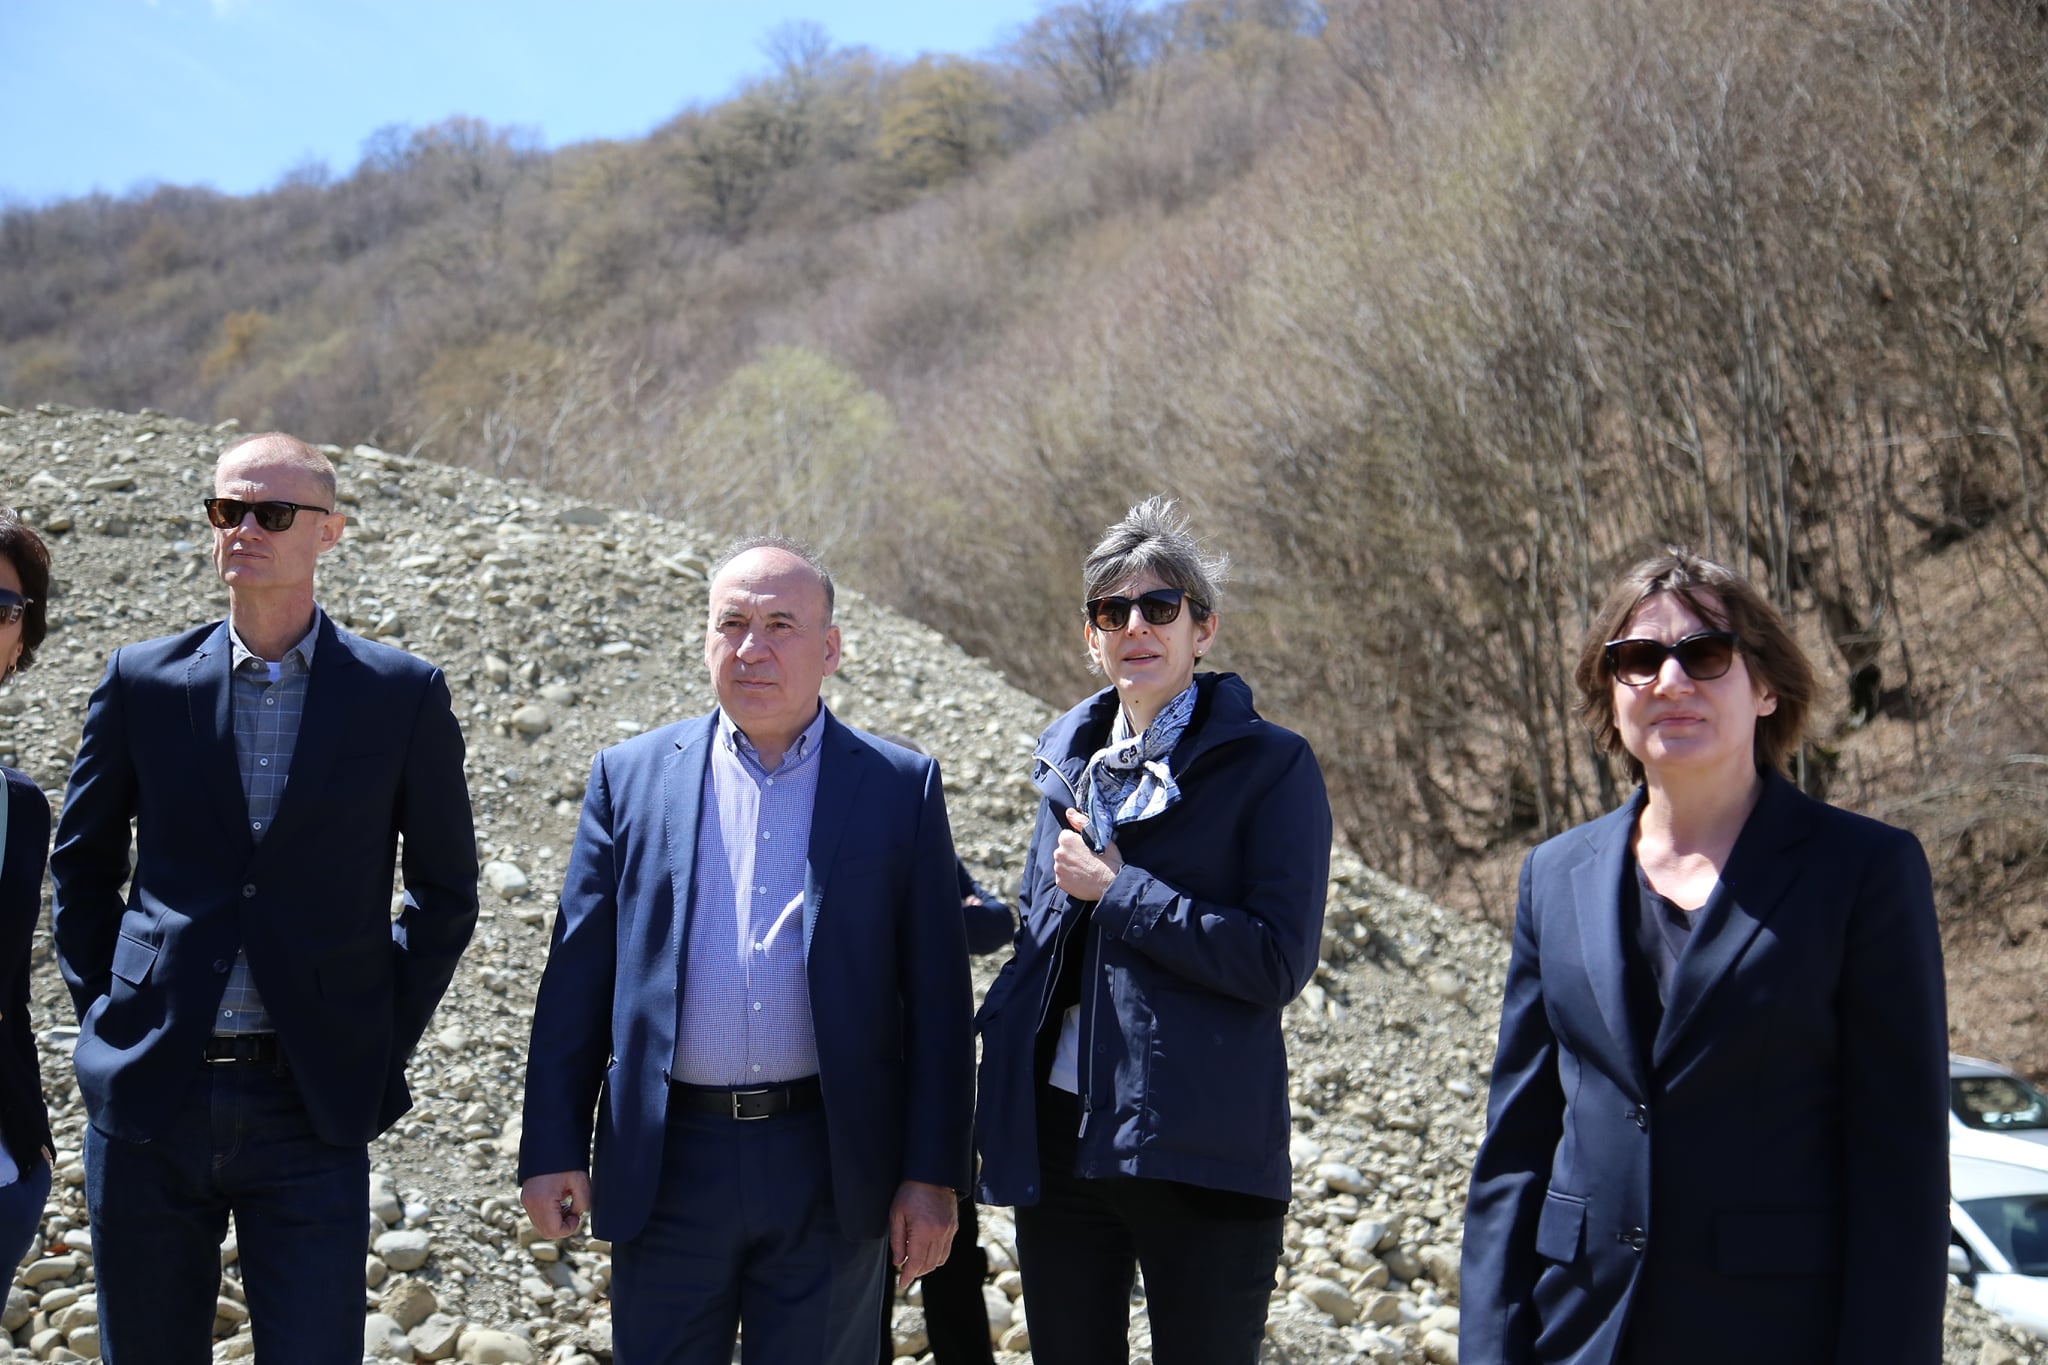 Within the framework of the project  "Reducing the Risk of Climate-Driven Disasters in Georgia." The UNIDEP Regional Director visited the Kakheti region